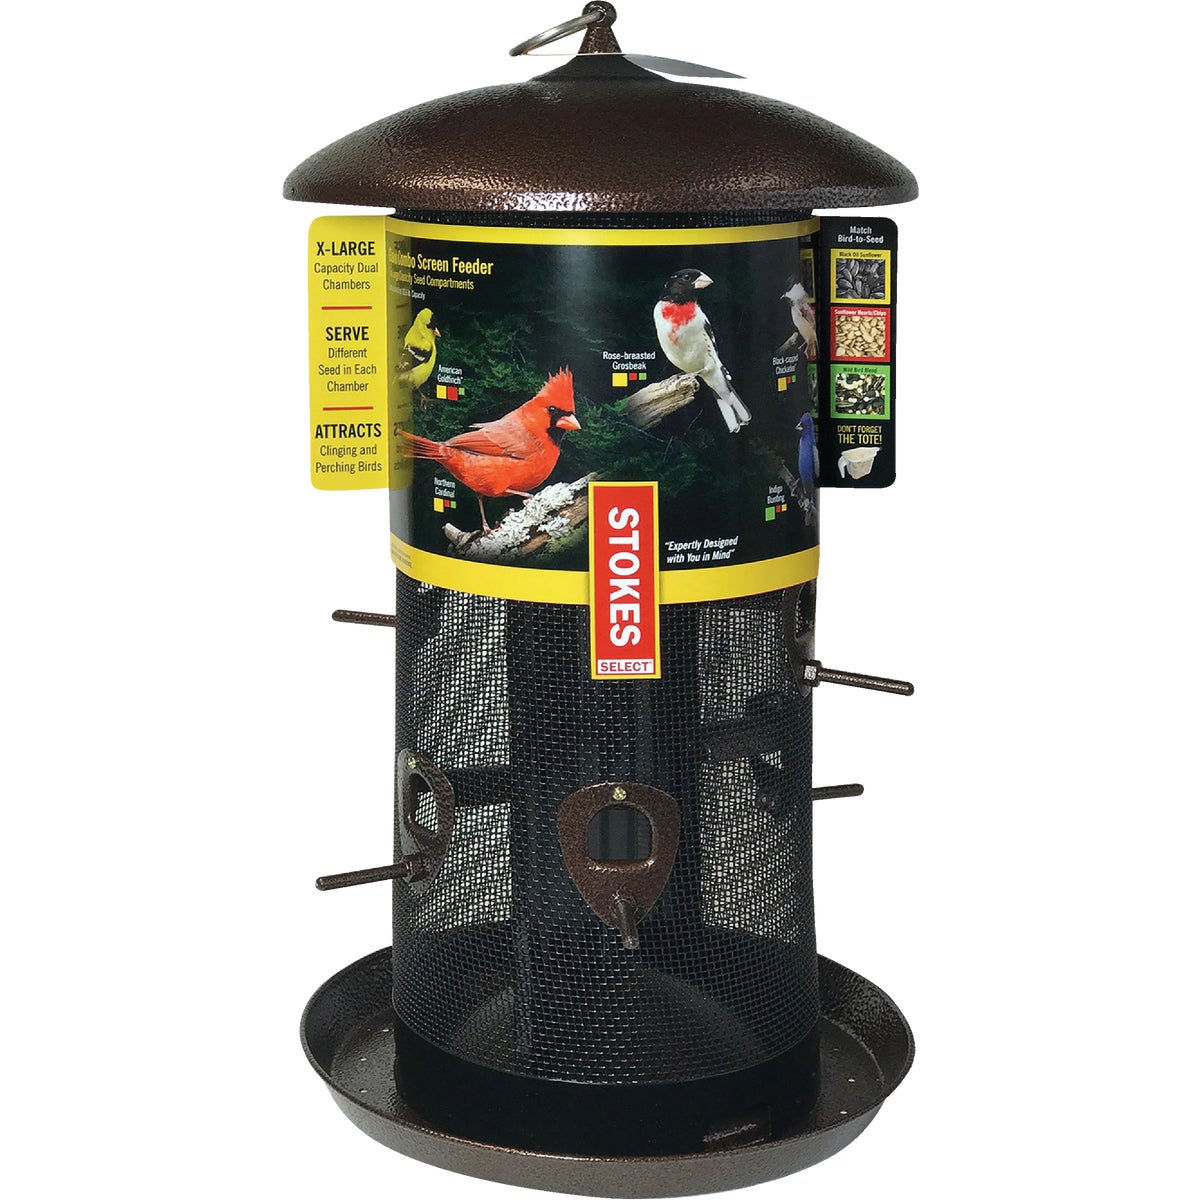 Item 701278, The giant combo screen bird feeder attracts the widest variety of birds.